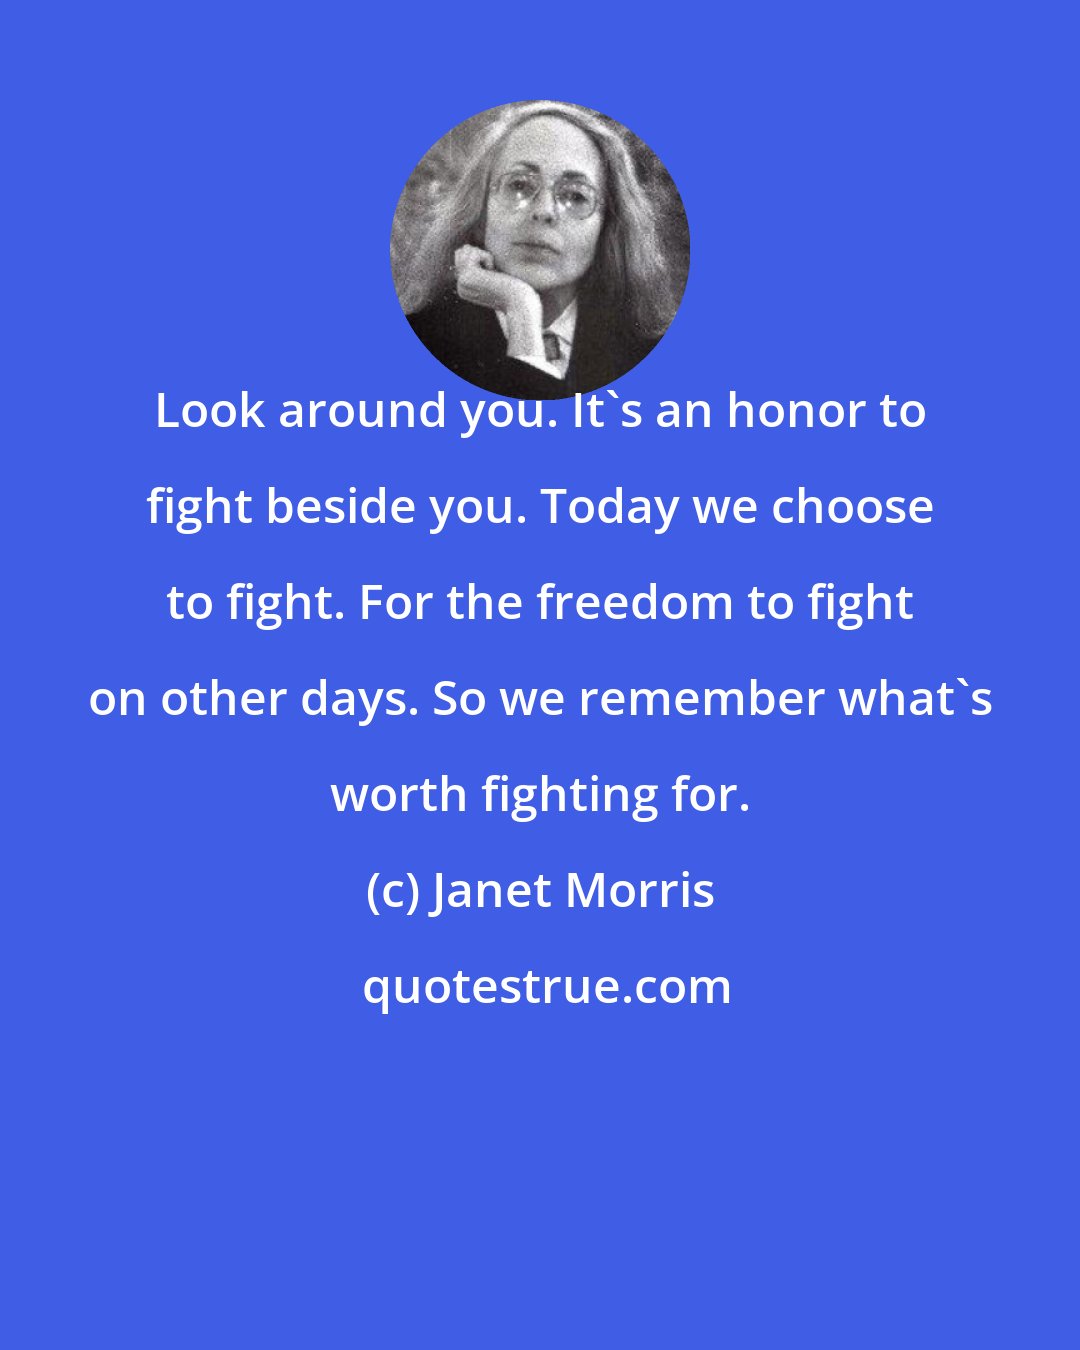 Janet Morris: Look around you. It's an honor to fight beside you. Today we choose to fight. For the freedom to fight on other days. So we remember what's worth fighting for.